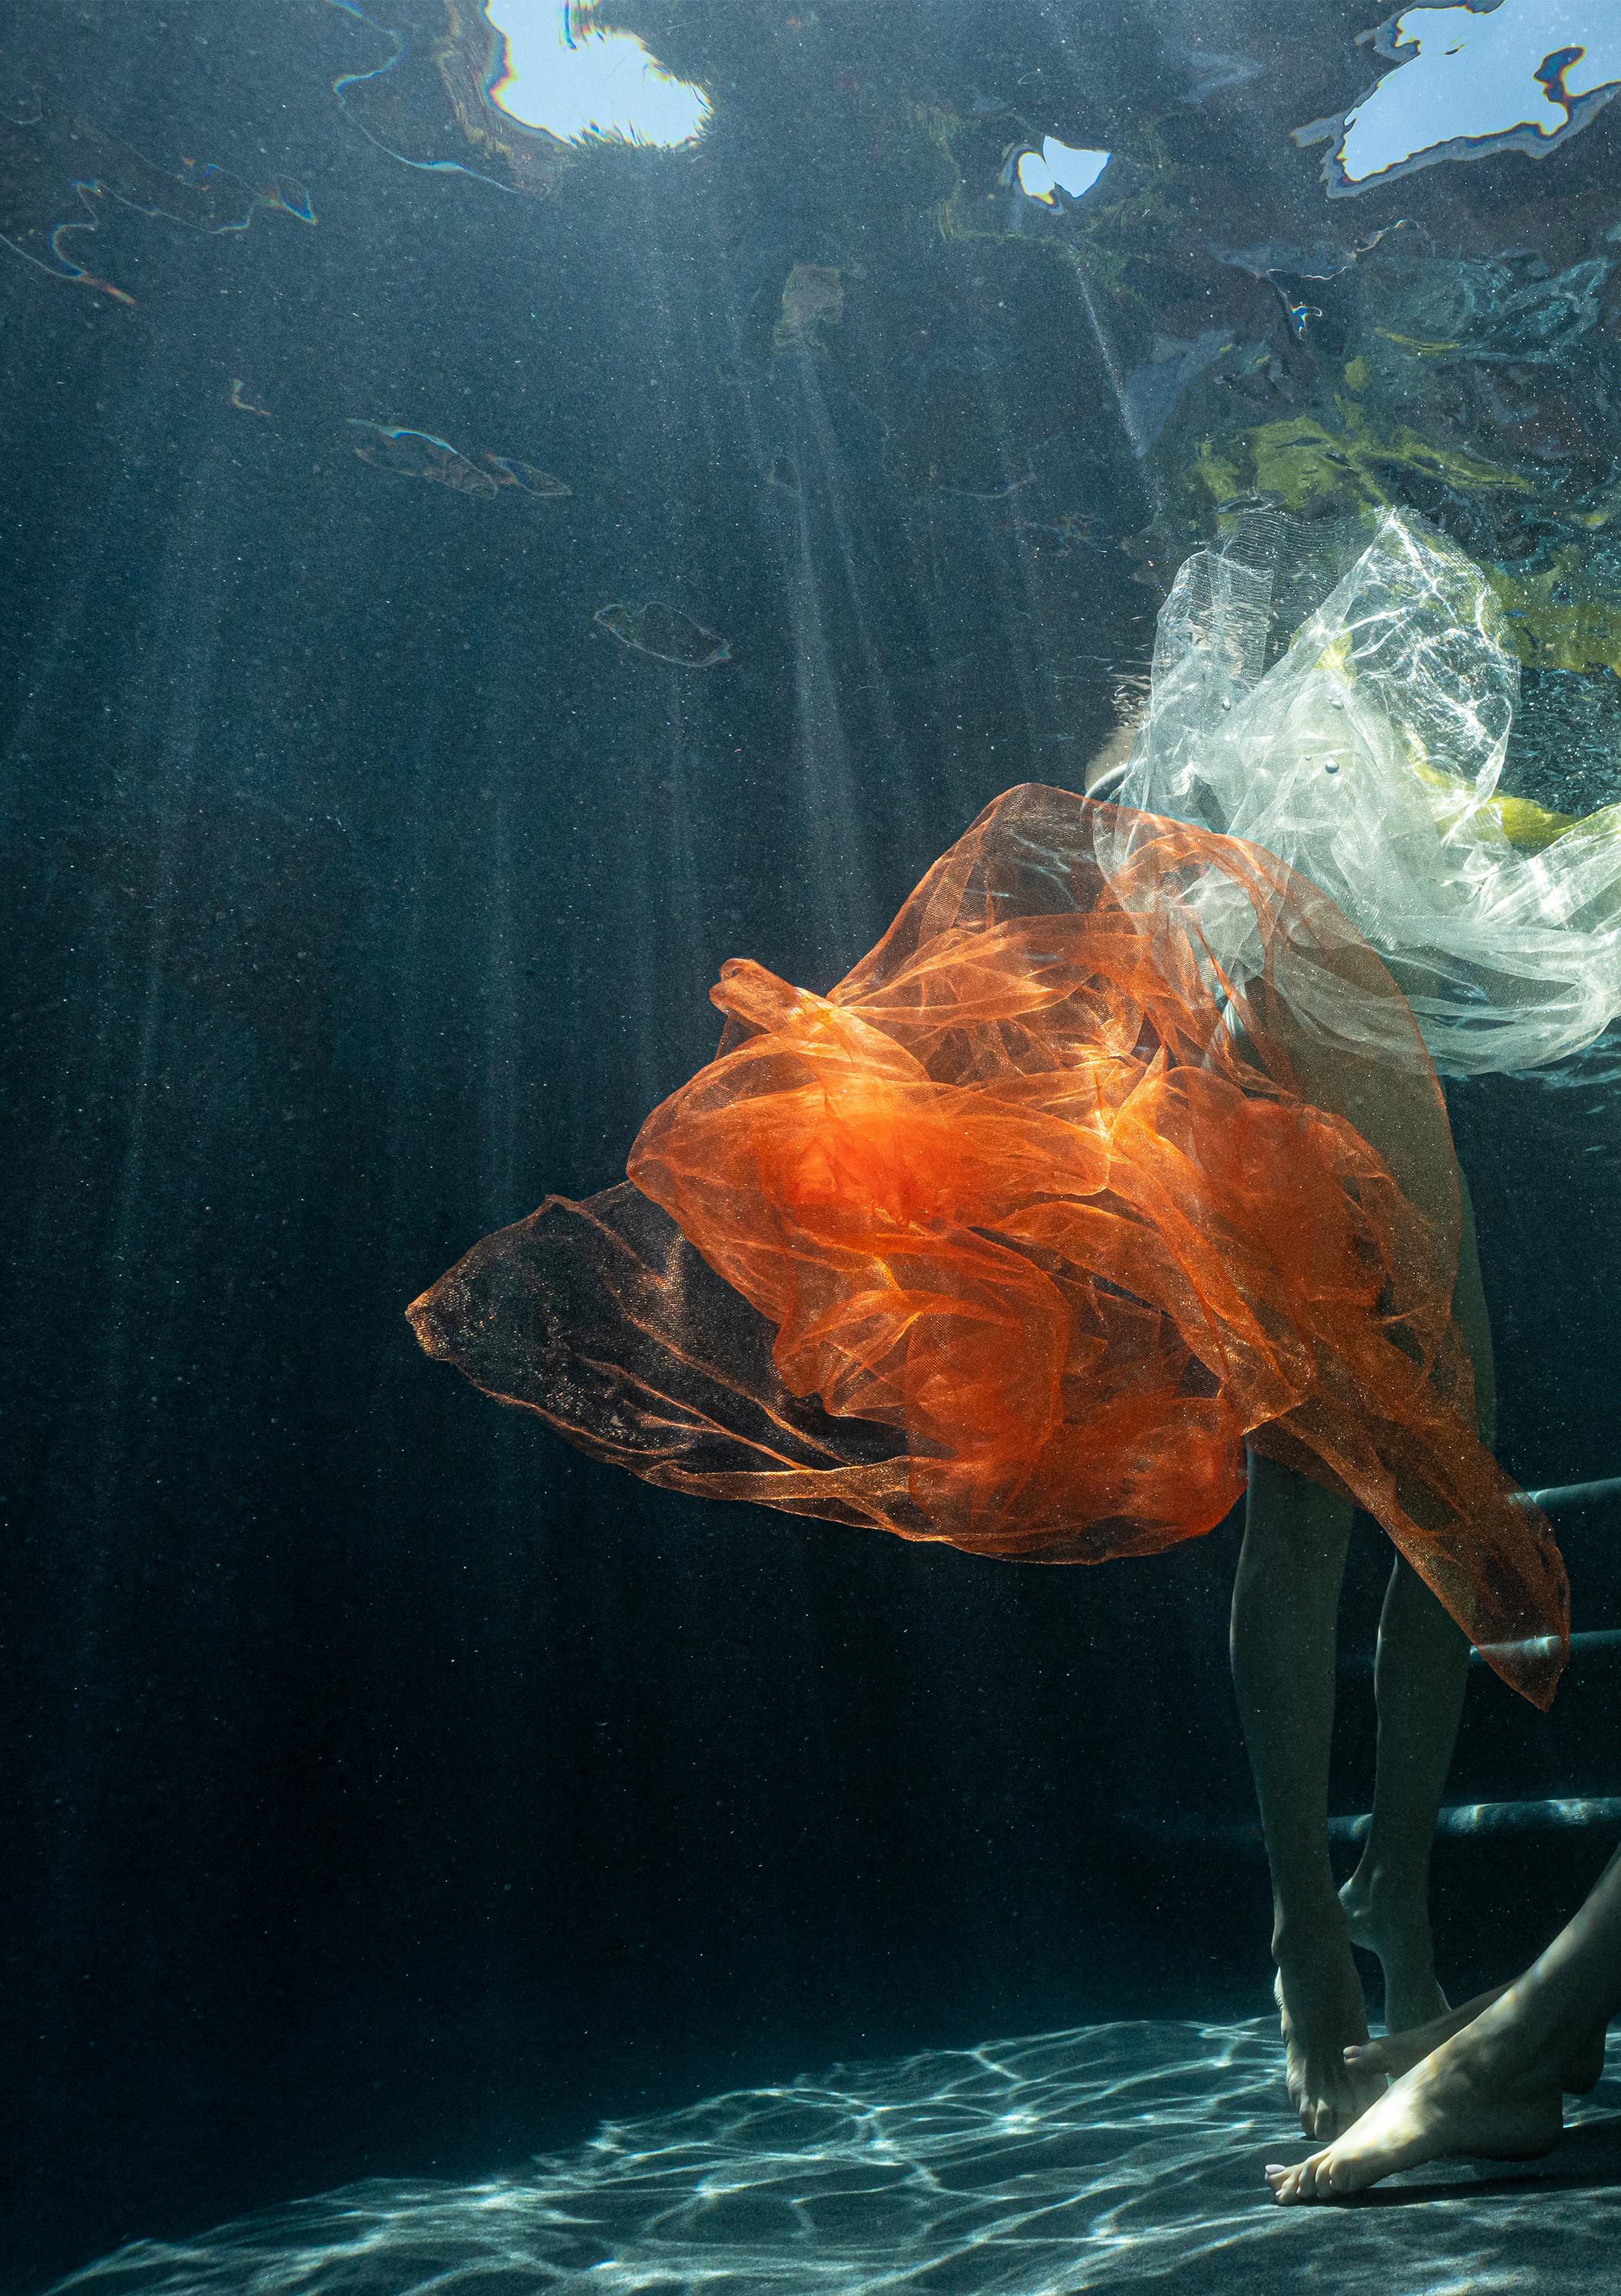 Underwater nude photograph of two models partially covered with bright tulle scarfs

Original gallery quality print on archival metallic paper signed by the artist.
Paper size: 18